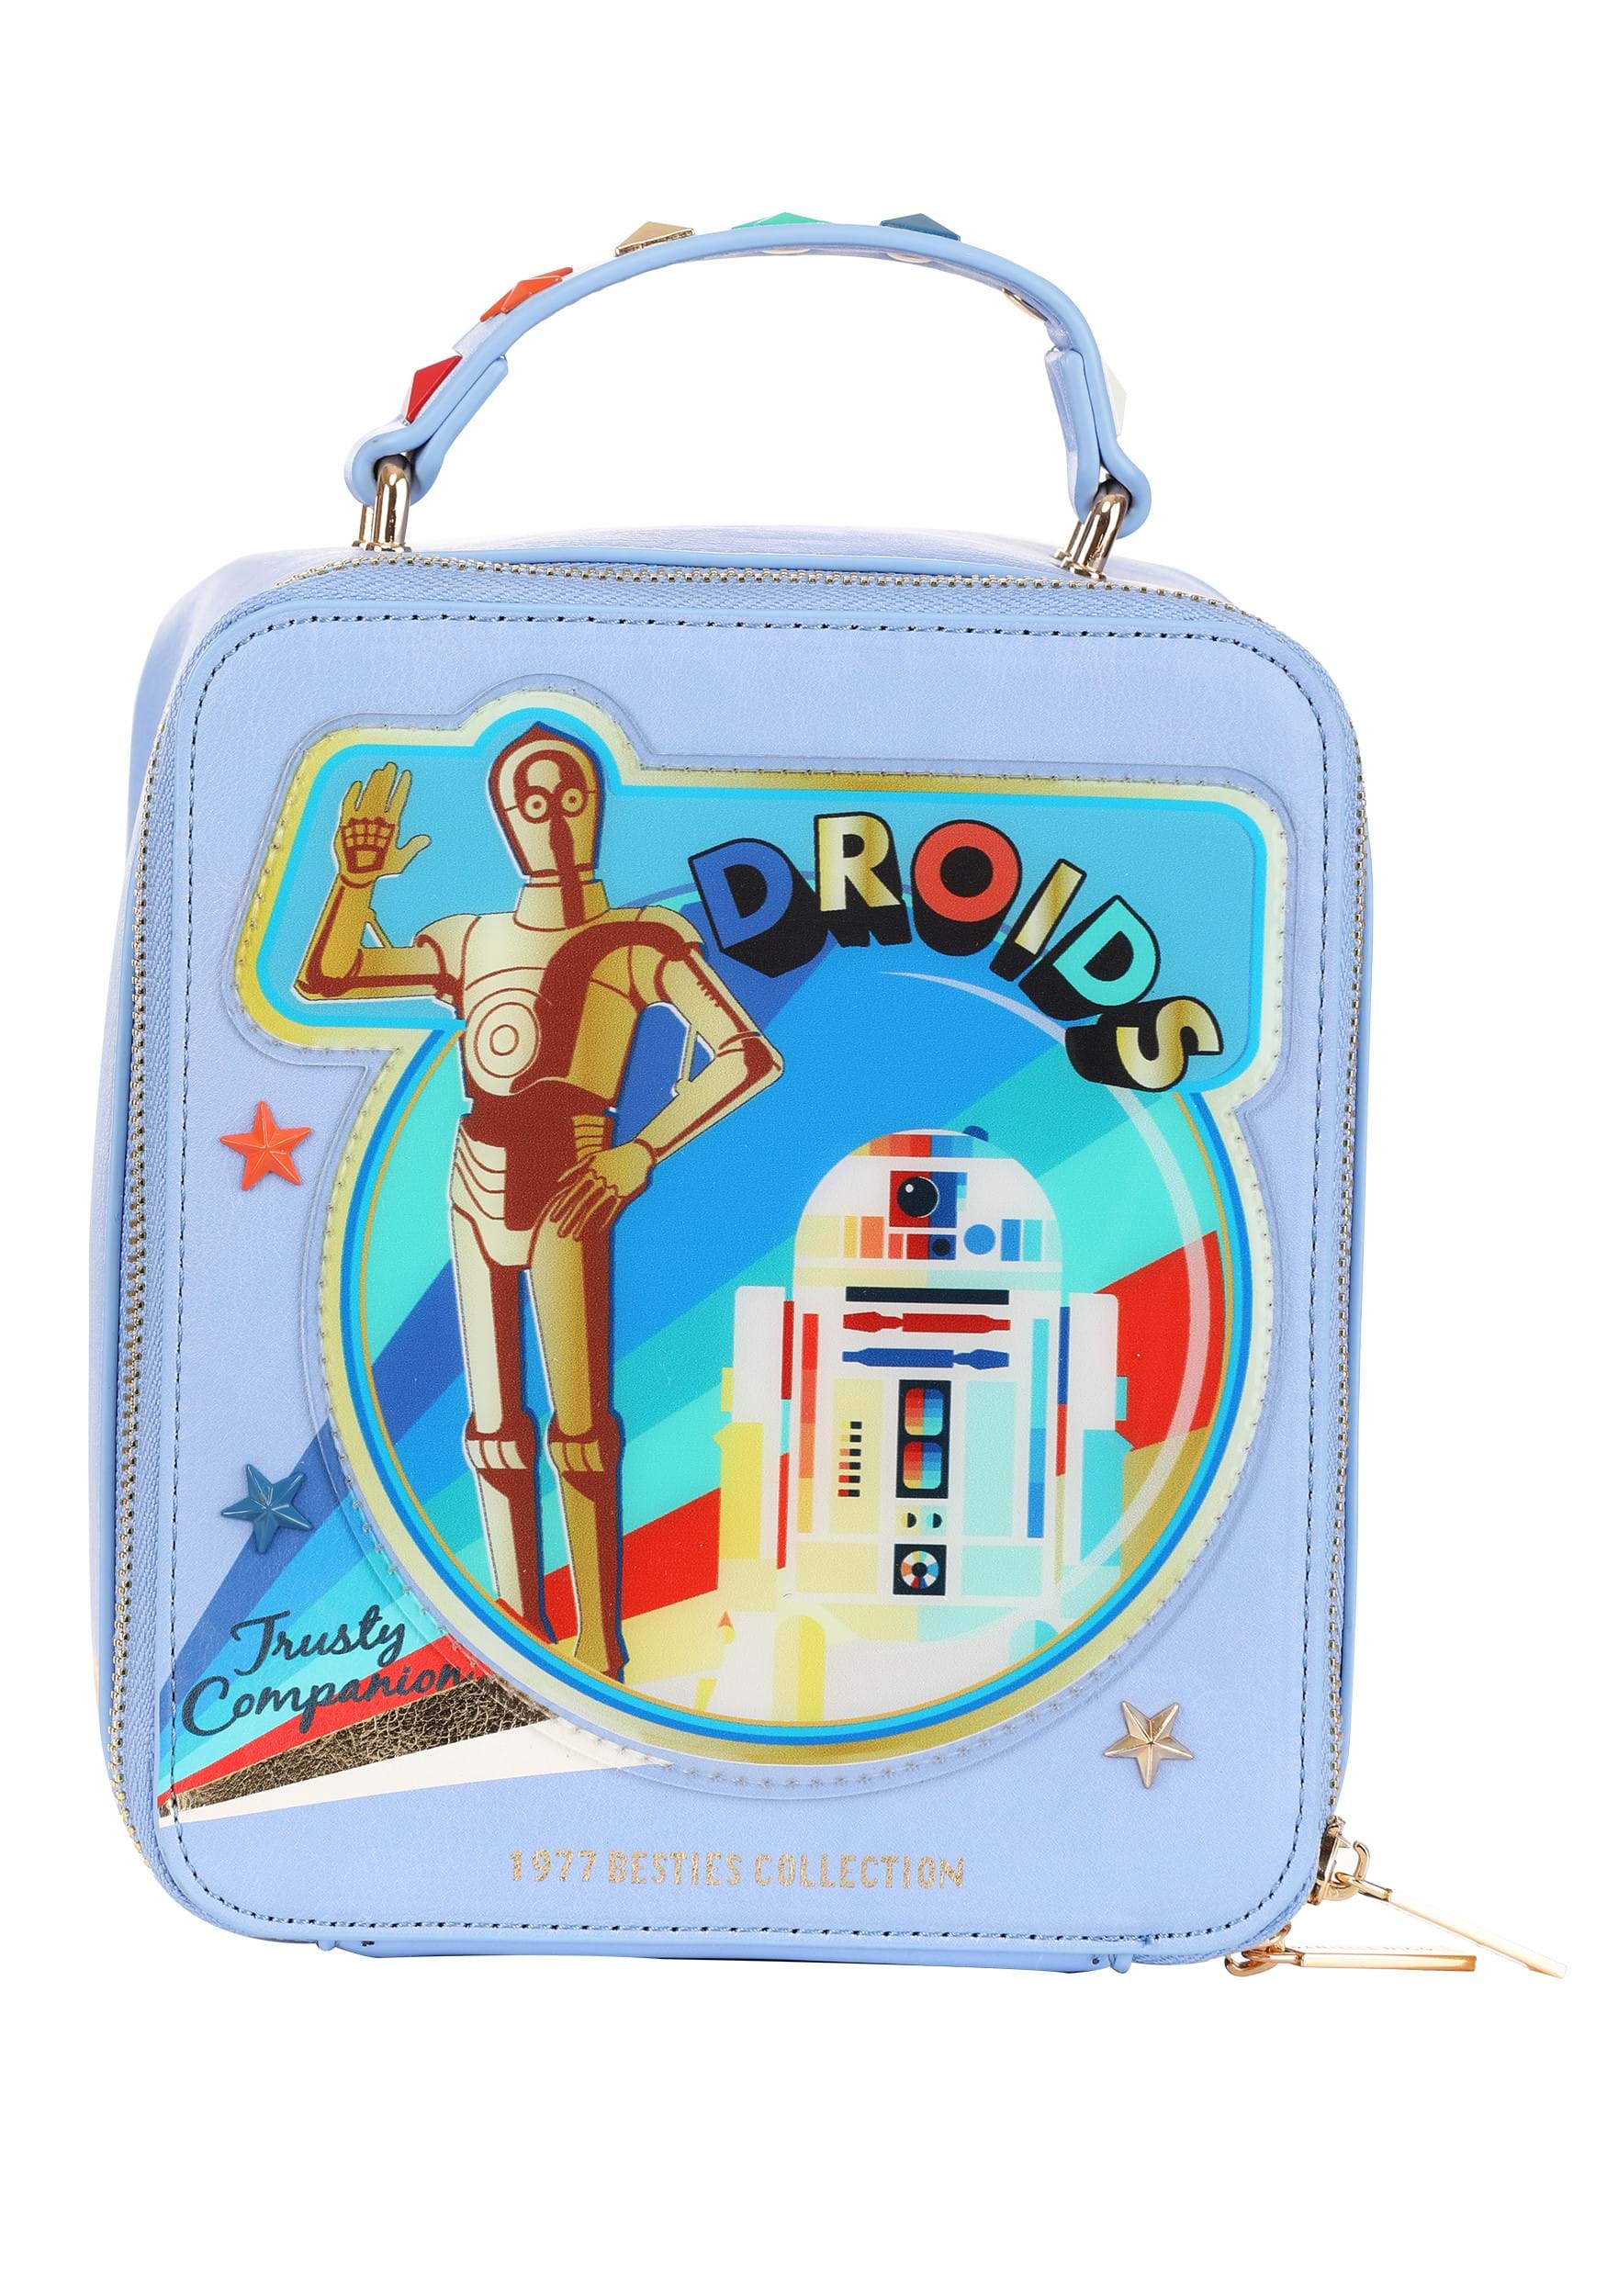 https://images.fun.com/products/84714/1-1/danielle-nicole-star-wars-c3po-r2d2-boxed-collection-bag.jpg